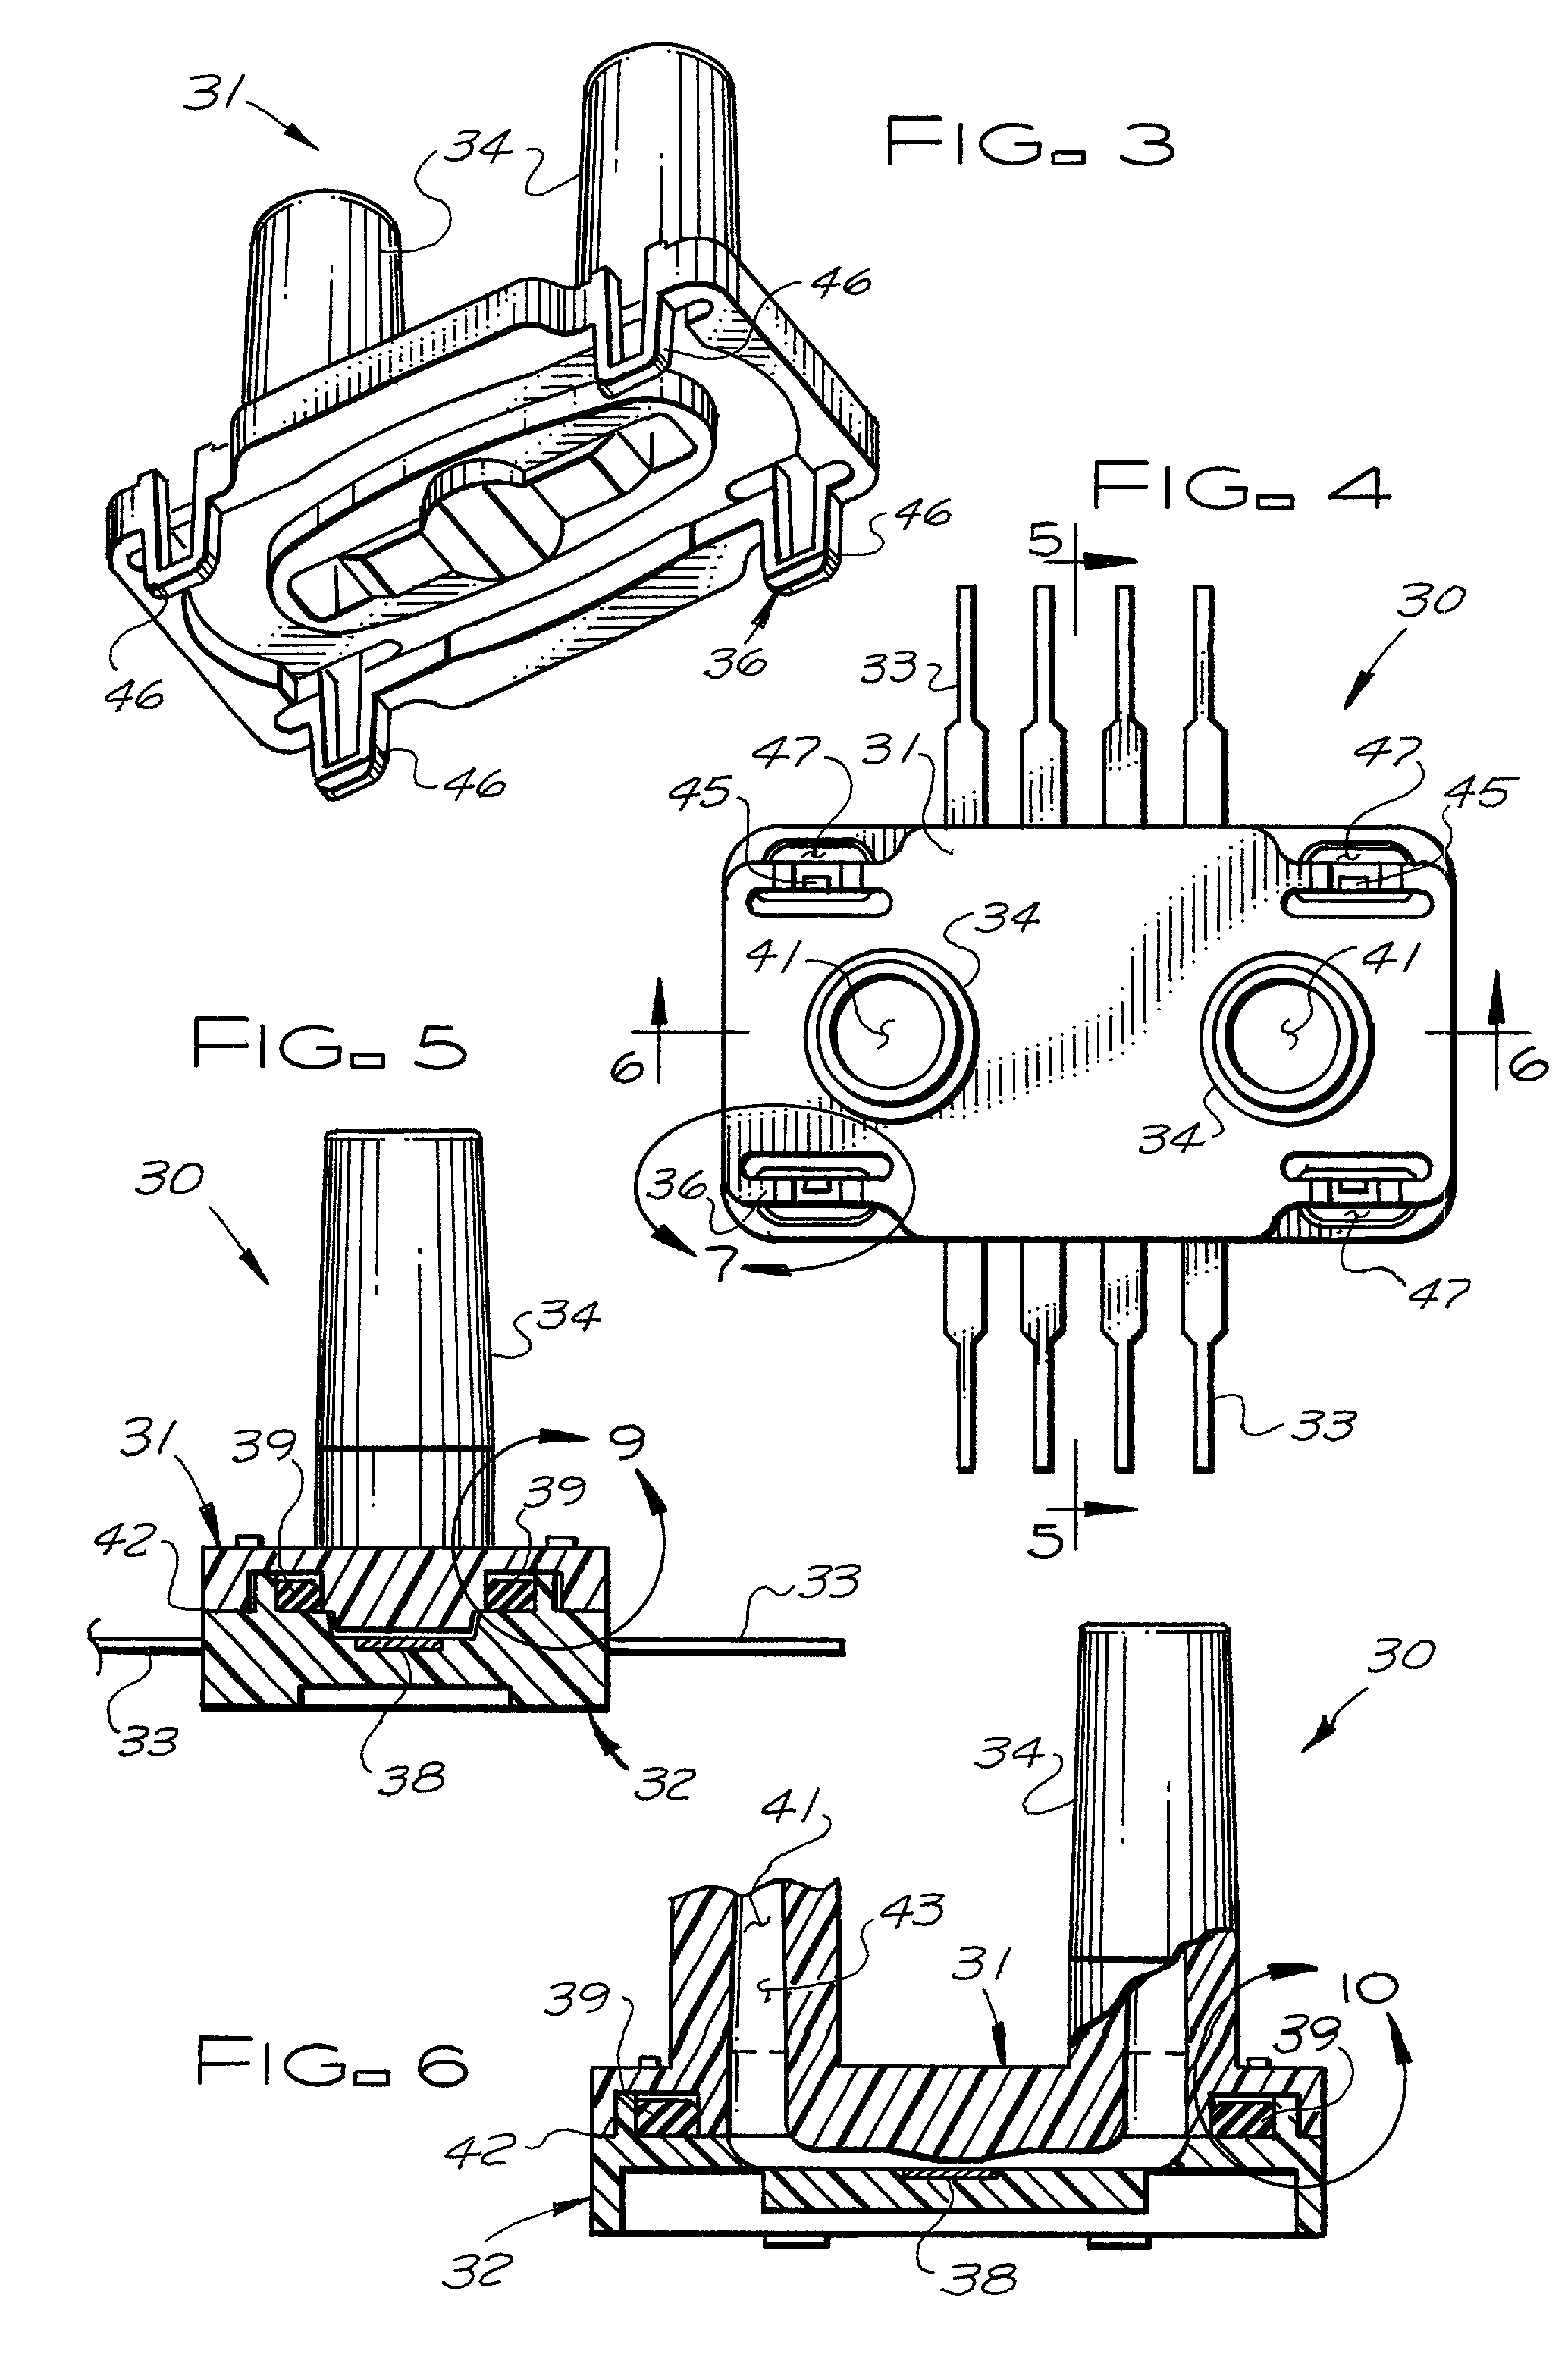 System for sensing the motion or pressure of a fluid